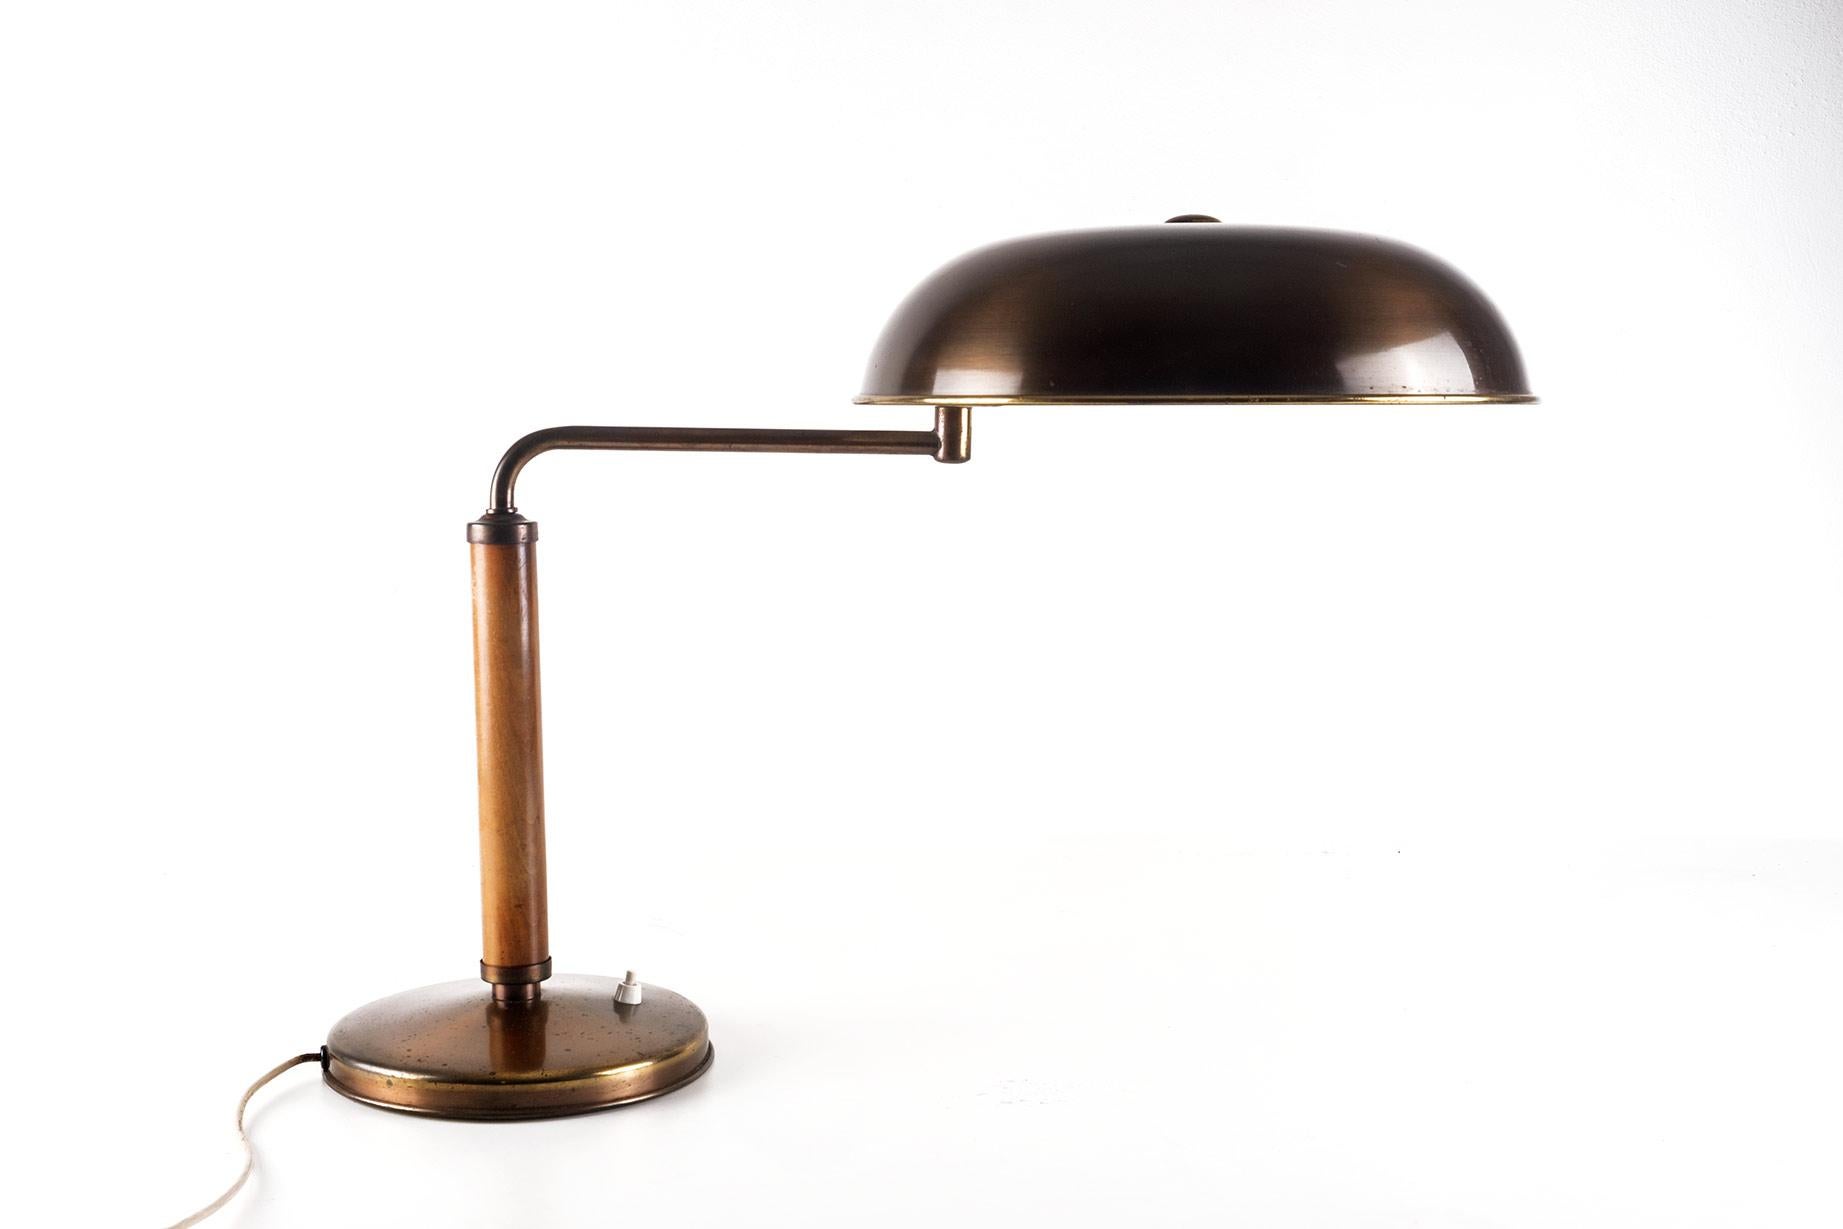 Swiss Bauhaus lamp model quick 1500 by Alfred Müller for Amba Basel, Switzerland. 
This splendid working lamp is pivoting and height adjustable (from 42cm to 54 cm).
 